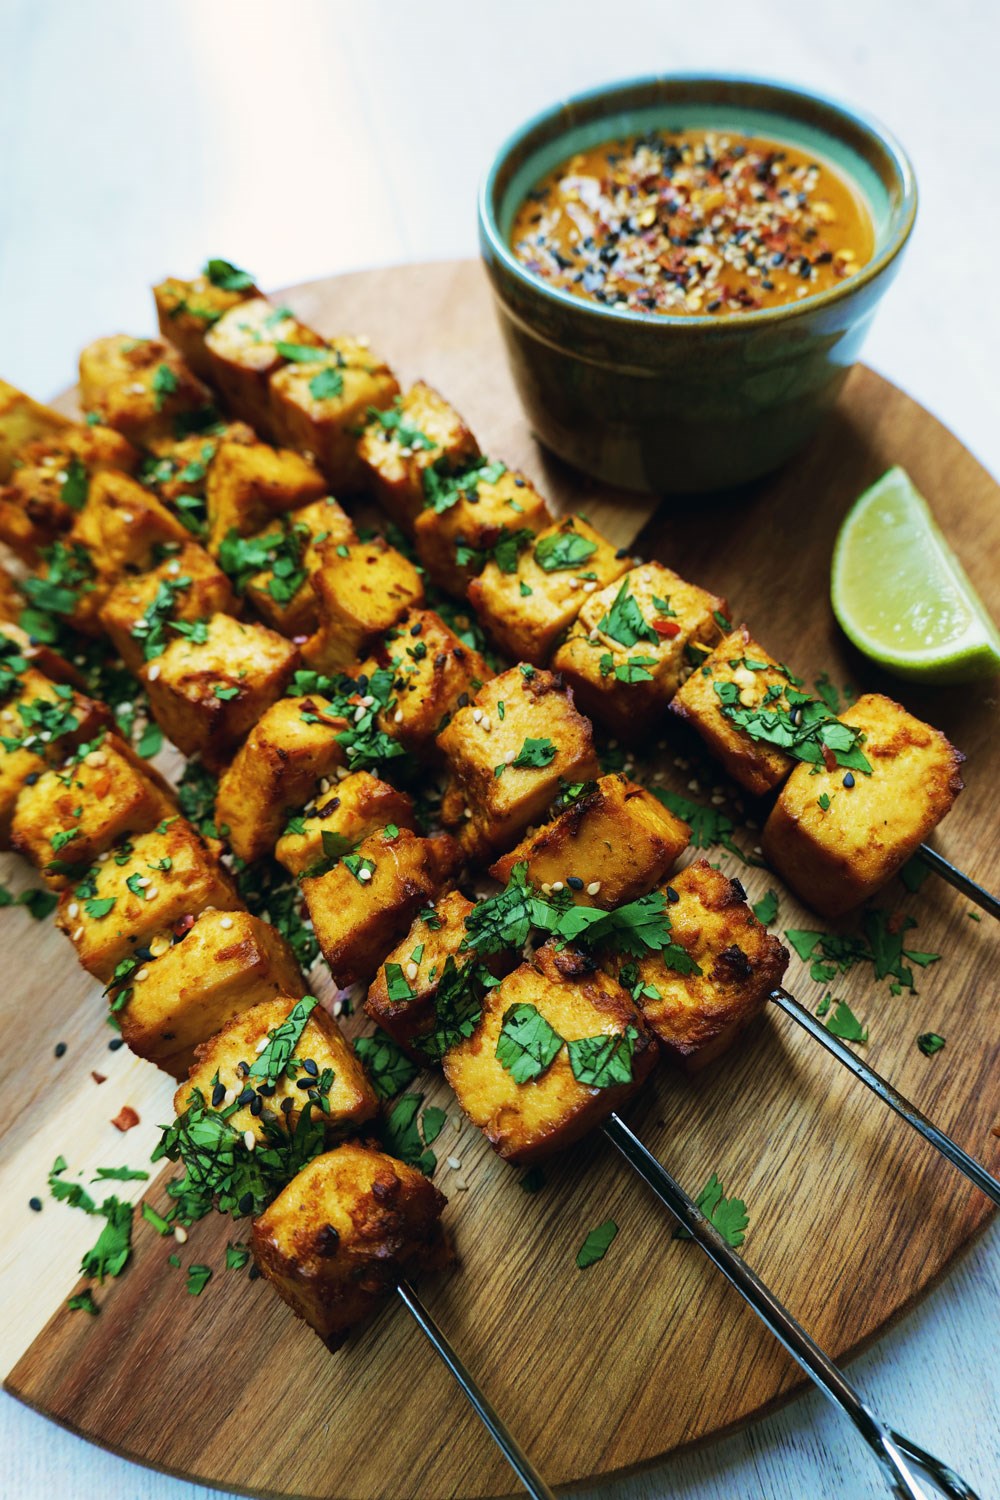 skewered tofu on a wooden chopping board with peanut sauce and garnished with herbs, sesame seeds and chillies